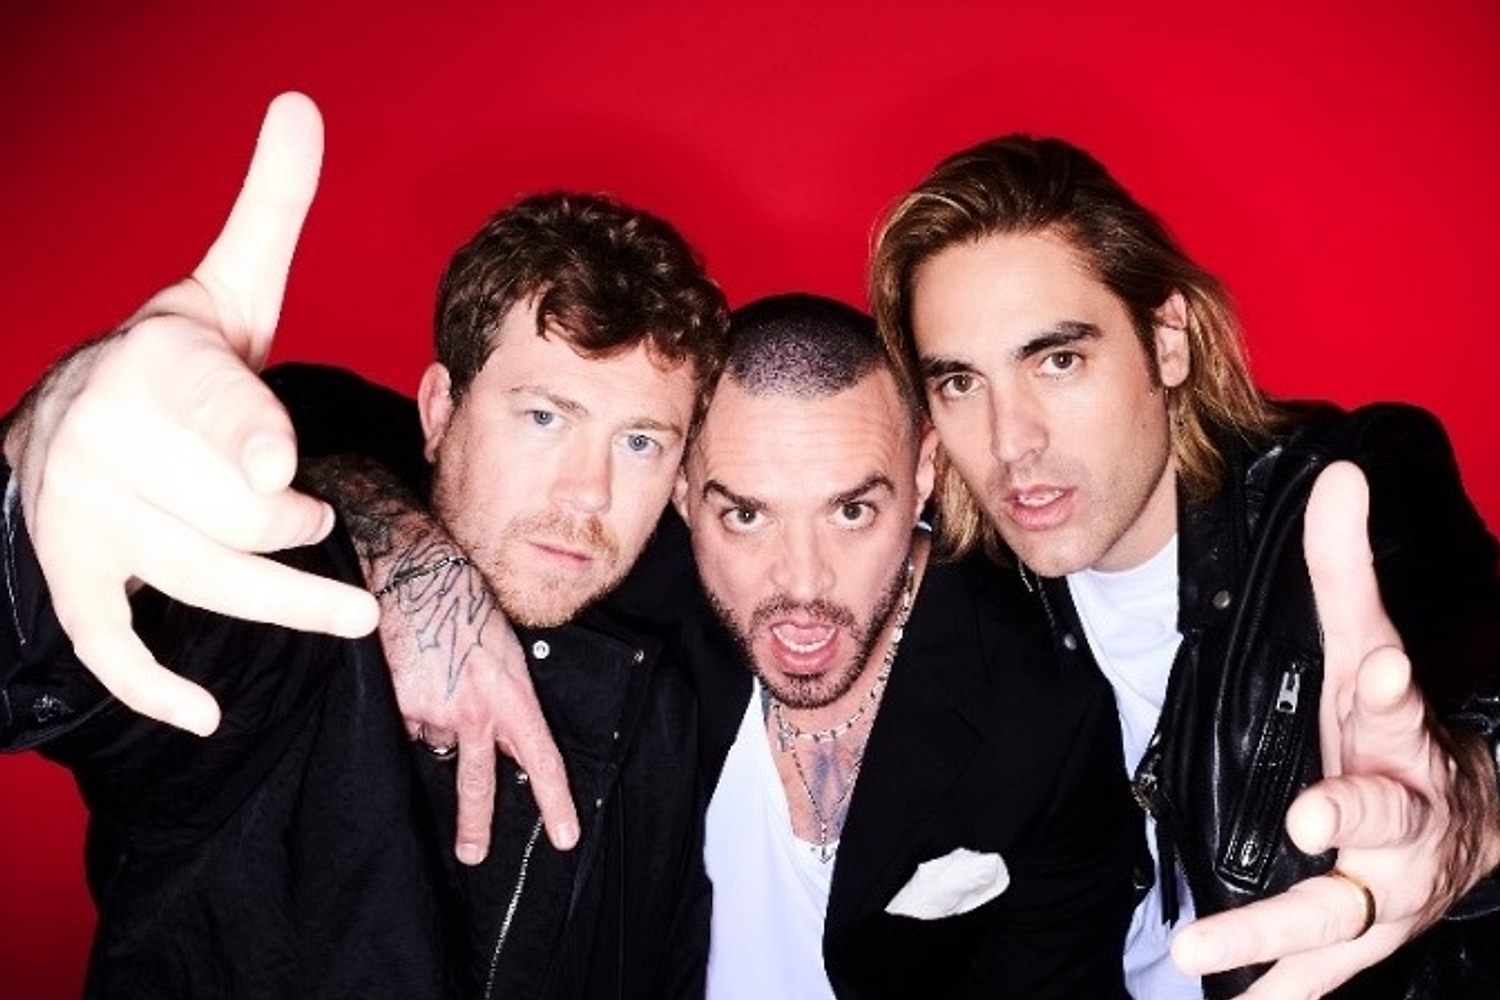 Busted announce 20th anniversary UK arena tour